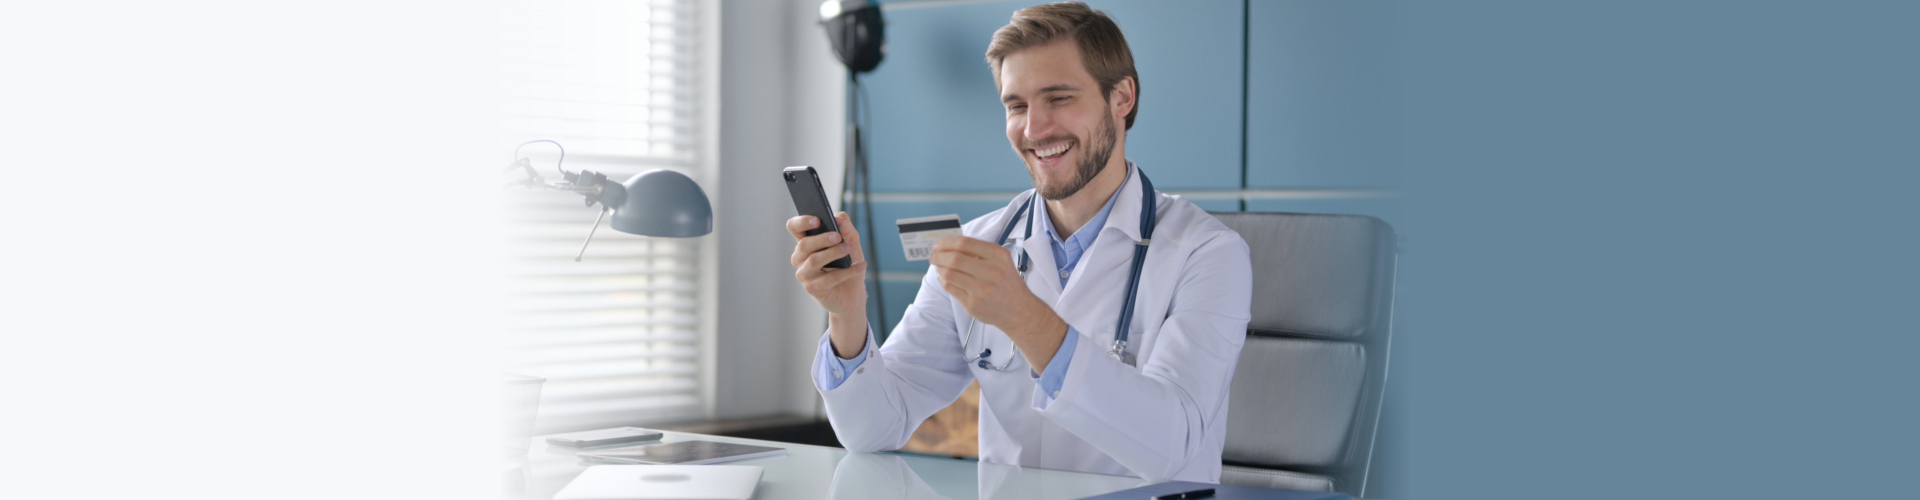 Doctor Making Online Payment